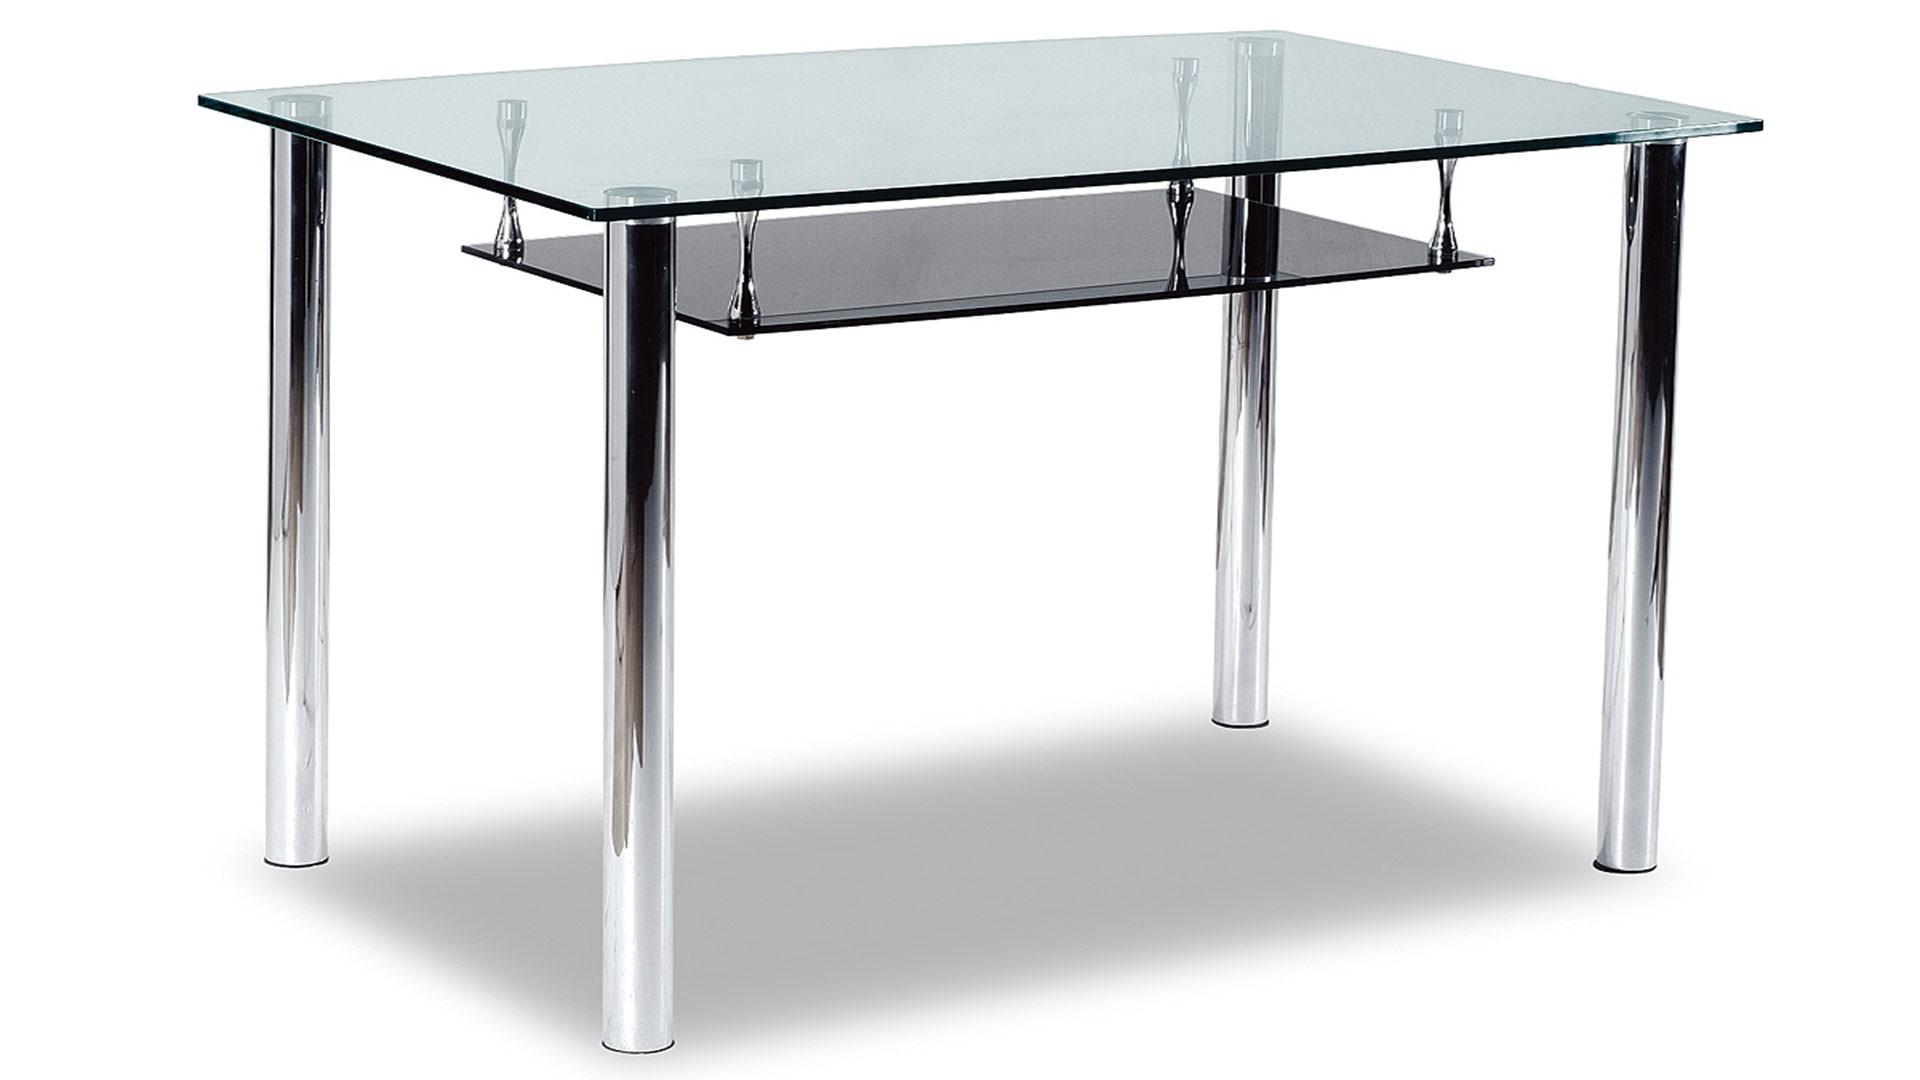 At Home USA 102S Dining Table